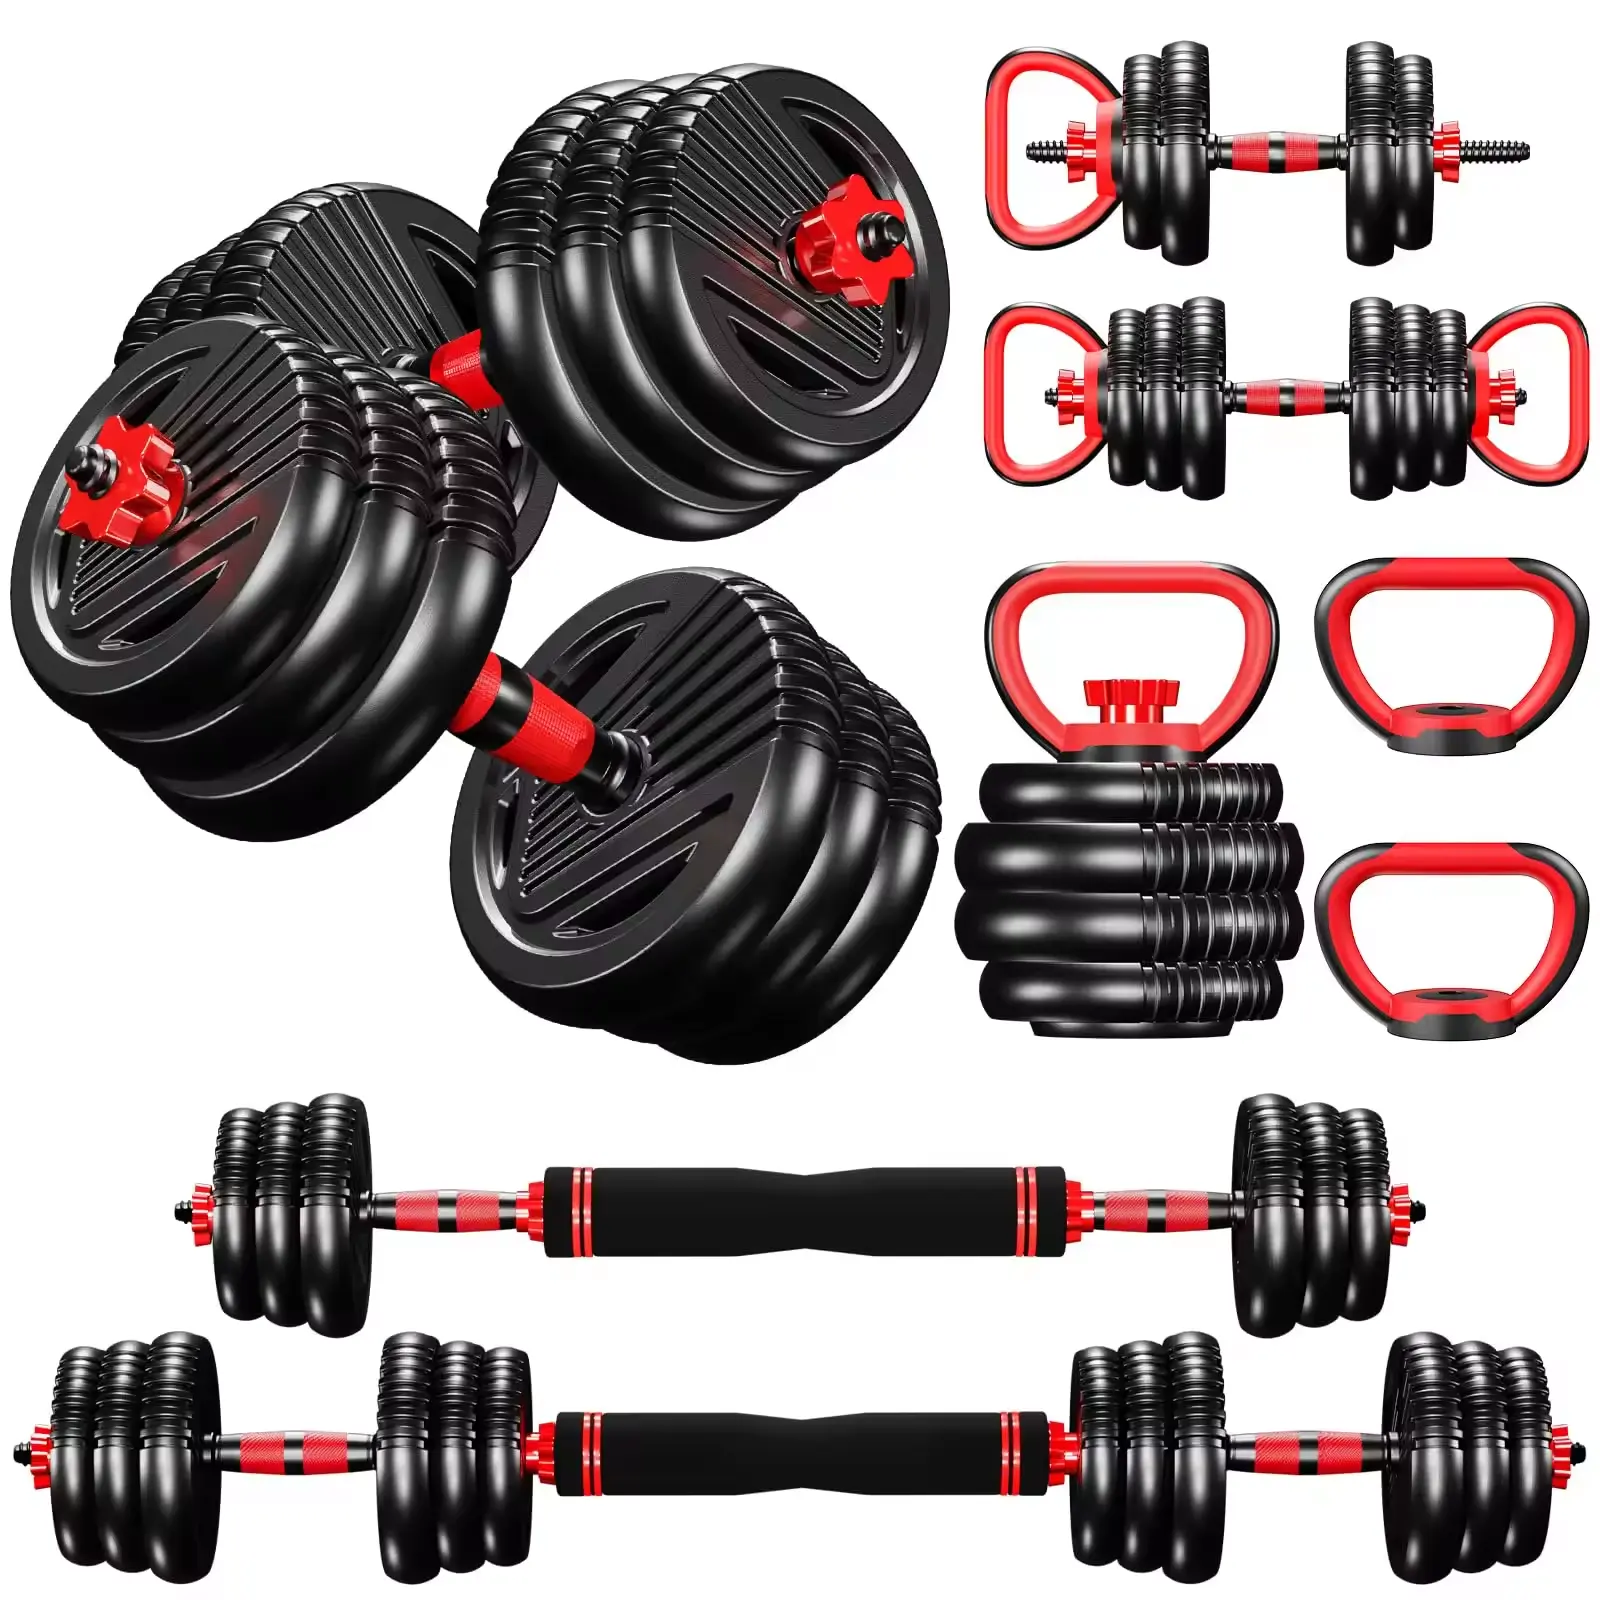 Wholesale Custom Logo Free Weights 10 15 20 30 40 50 KG Environmental Protection Cement adjustable Dumbbells And Barbel Sets